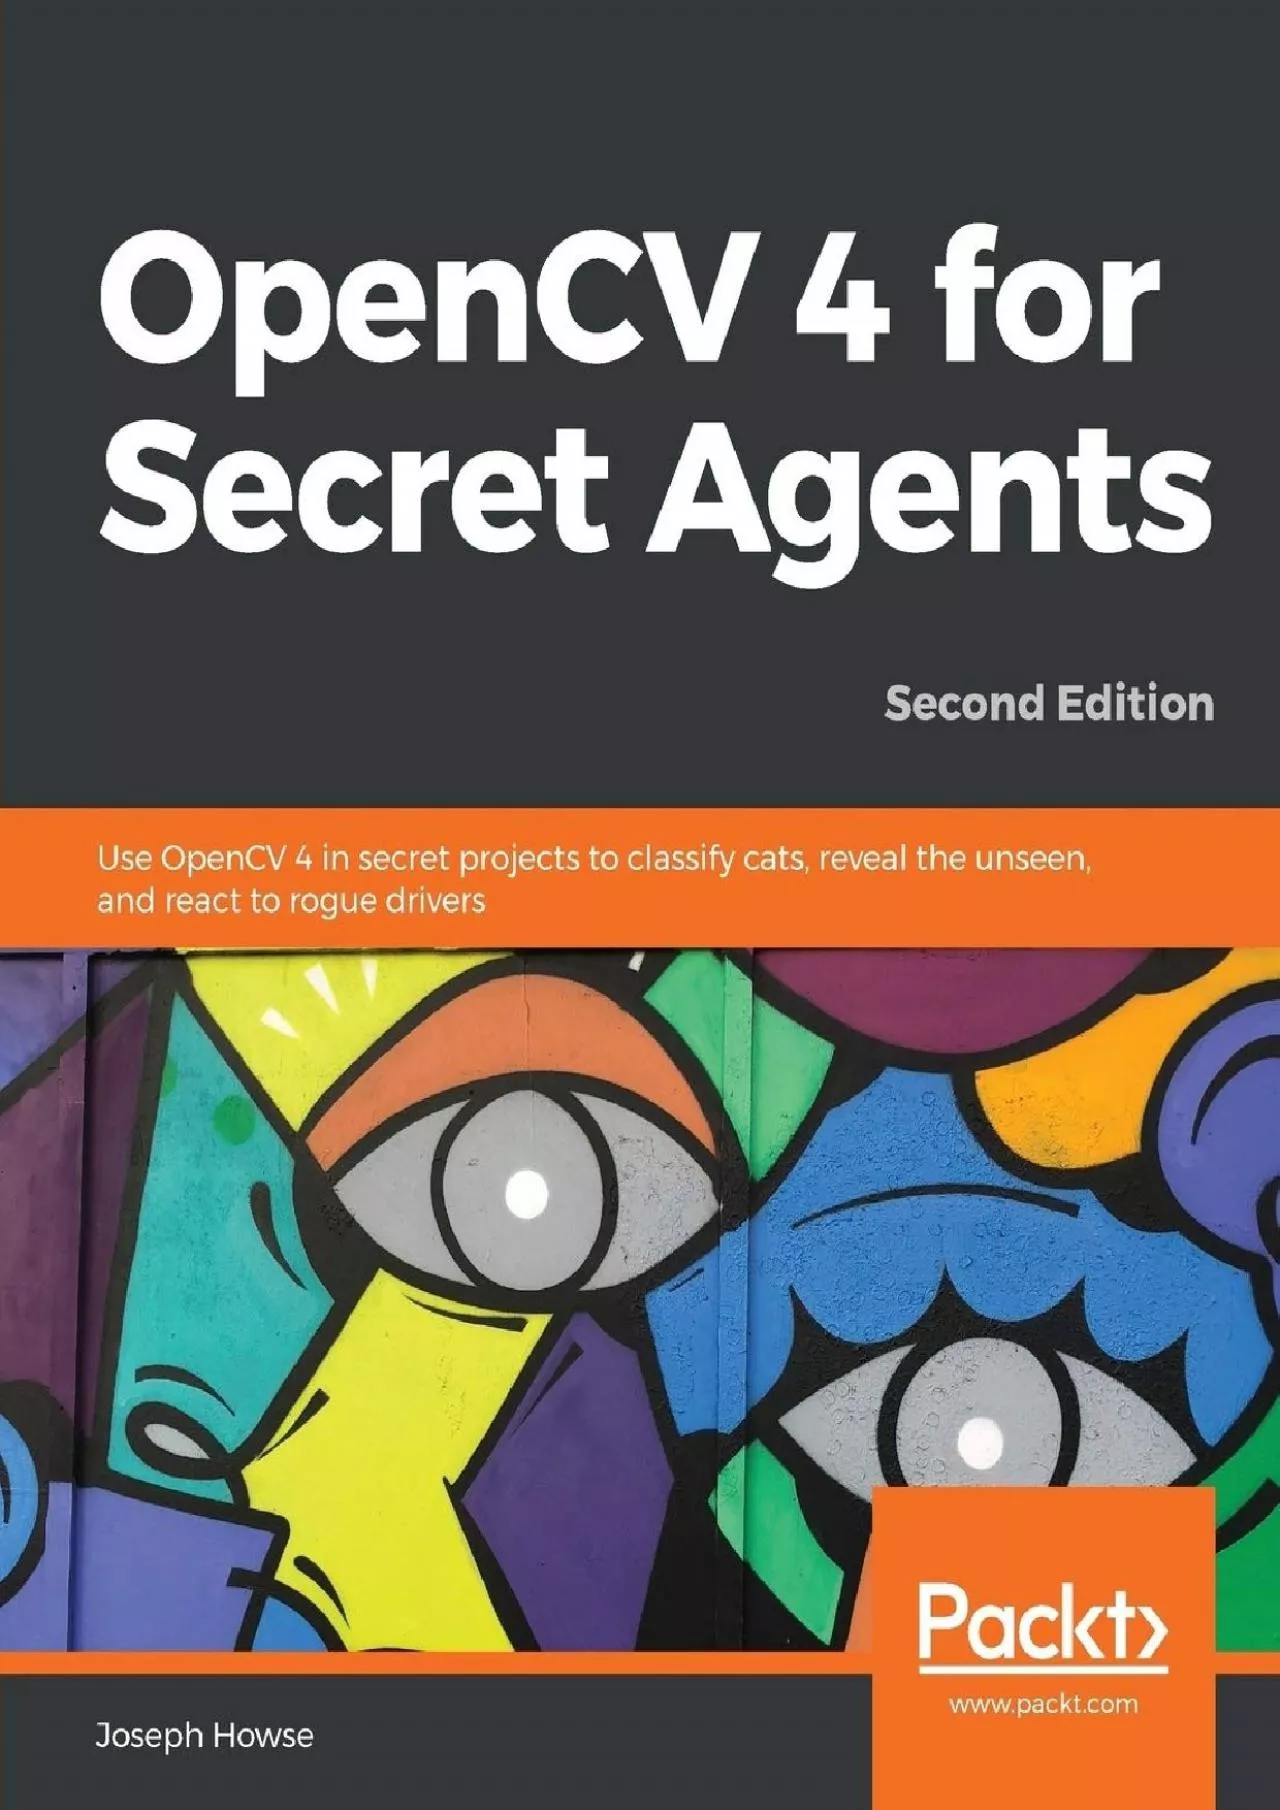 [FREE]-OpenCV 4 for Secret Agents: Use OpenCV 4 in secret projects to classify cats, reveal